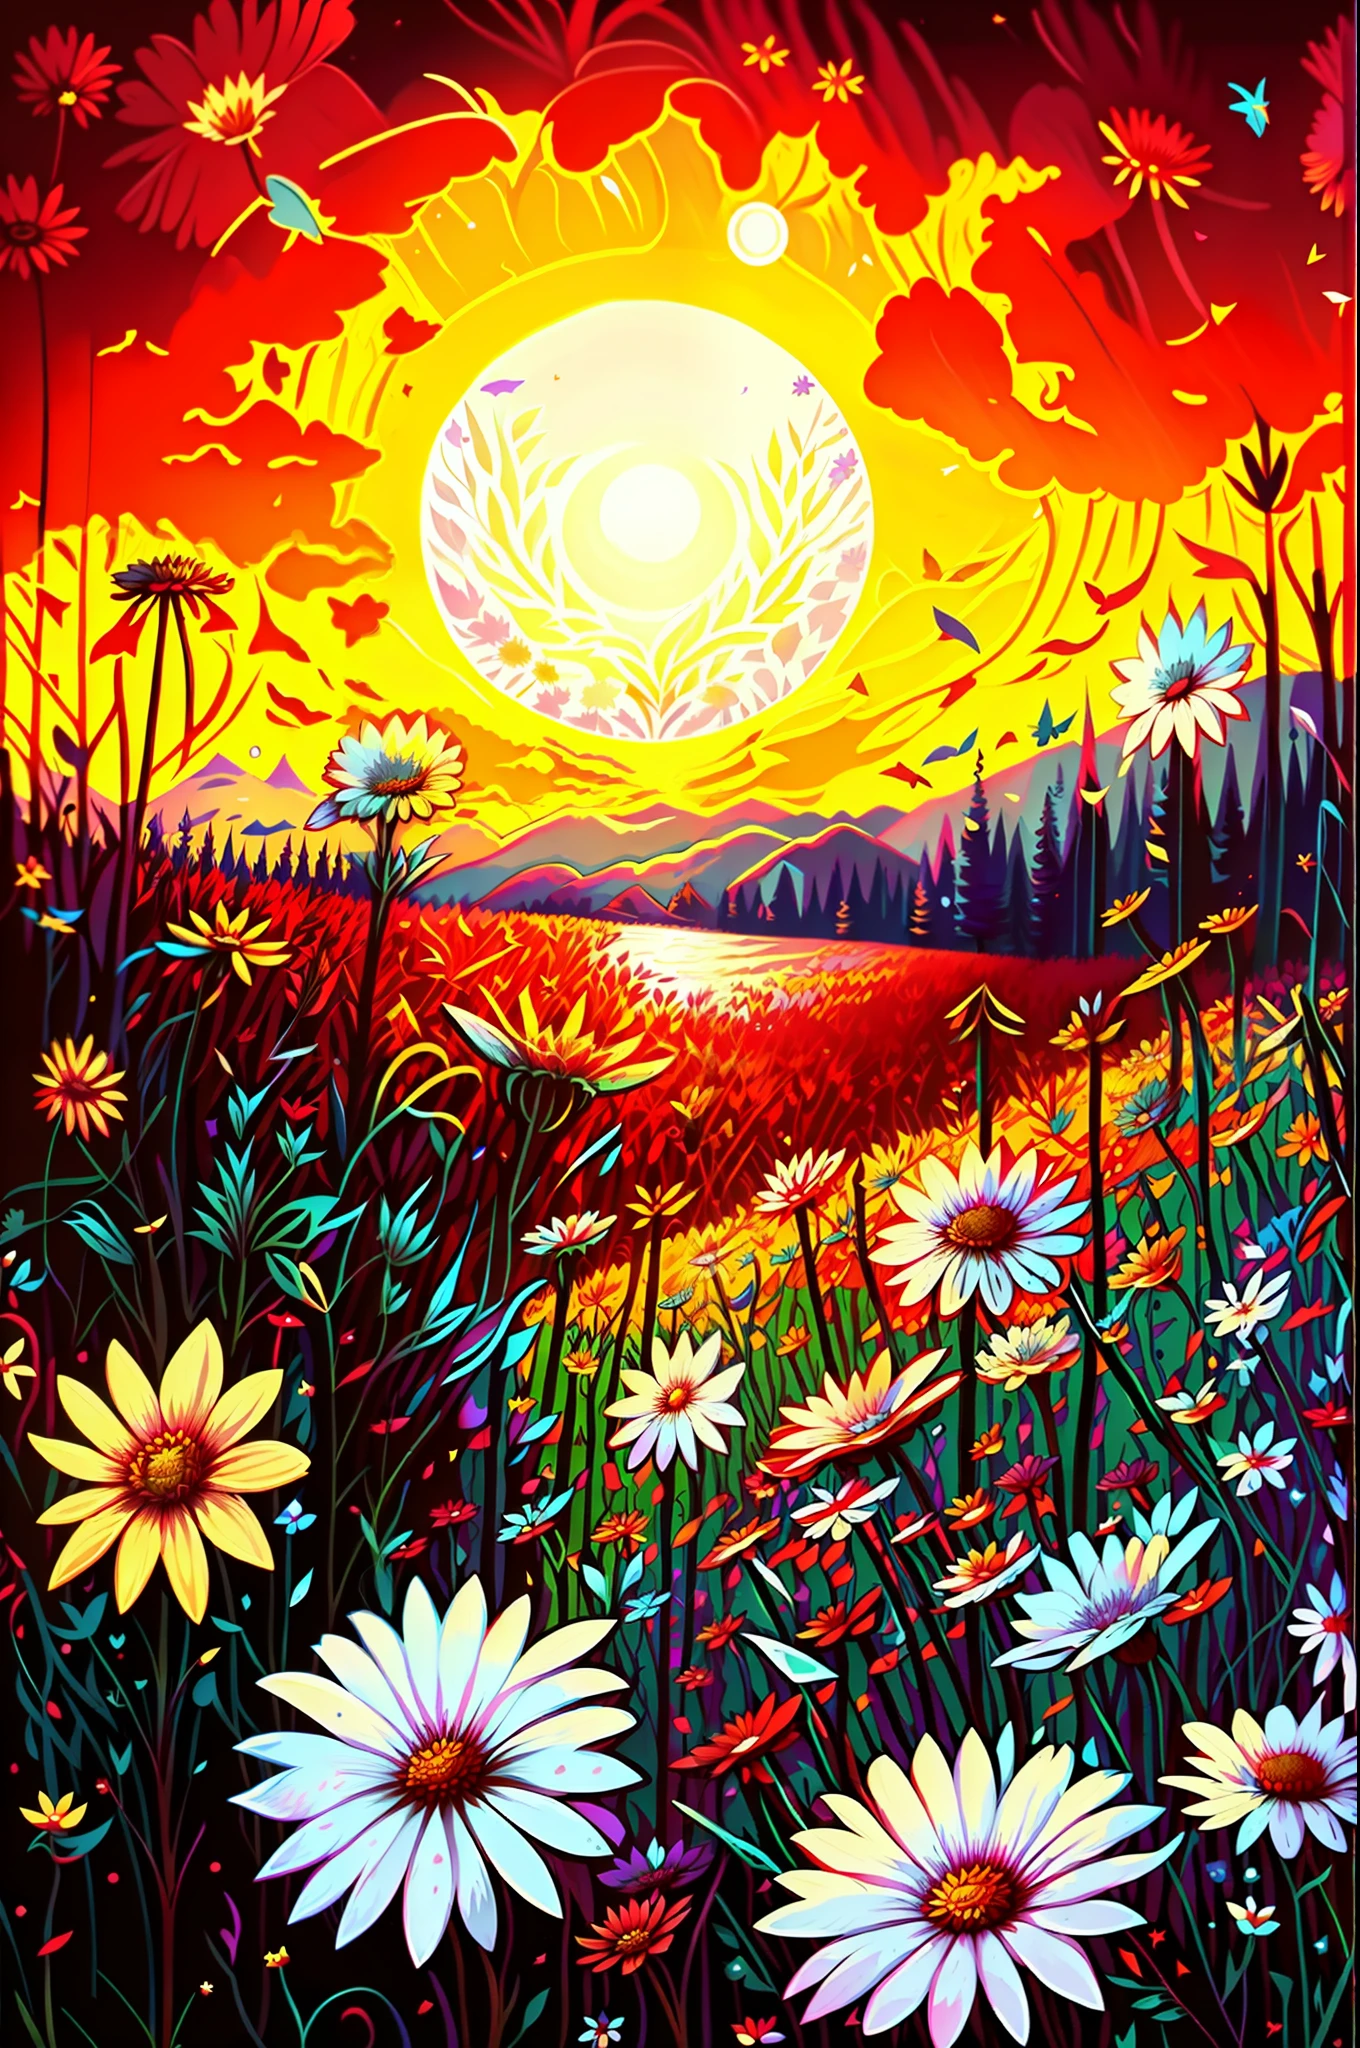 a painting of a field of daisies and other flowers, floral sunset, field of fantasy flowers, sunny meadow, the brilliant dawn on the meadow, daisies and poppies, summer meadow, moonlight shining on wildflowers, in a field of flowers, red sun over paradise, gorgeous art, beautiful art, sunset glow, whimsical art, field of flowers, whimsical fantasy landscape art, sunny afternoon